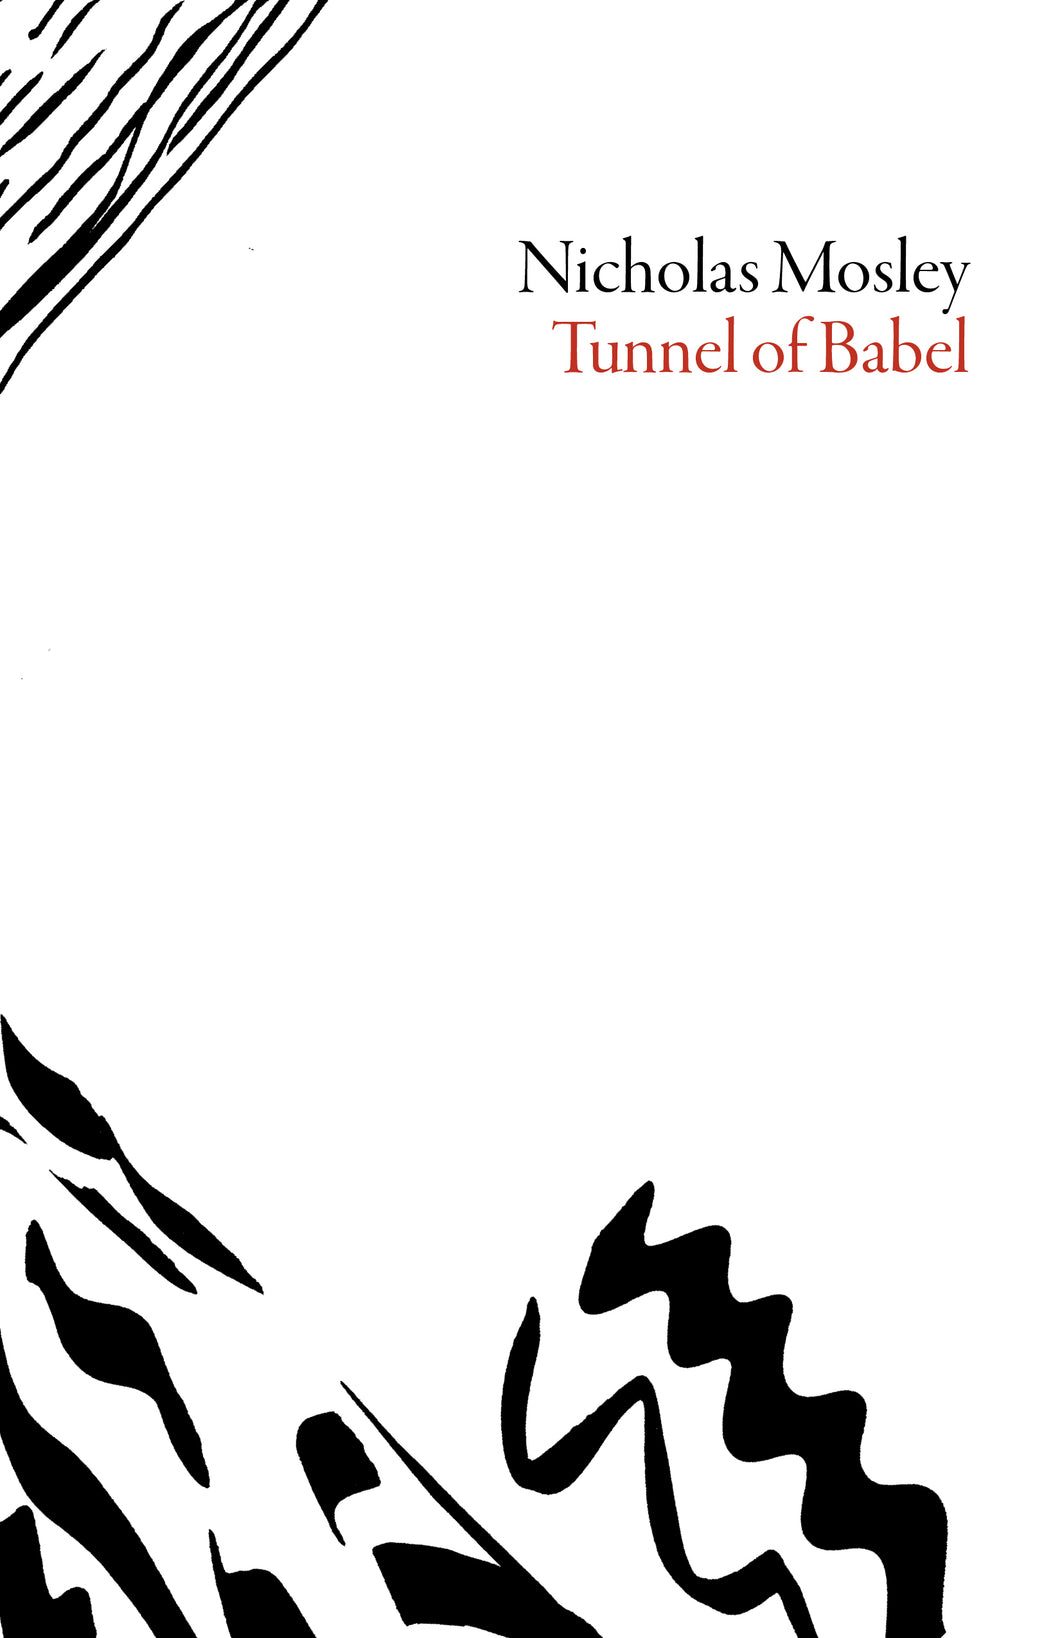 Tunnel of Babel